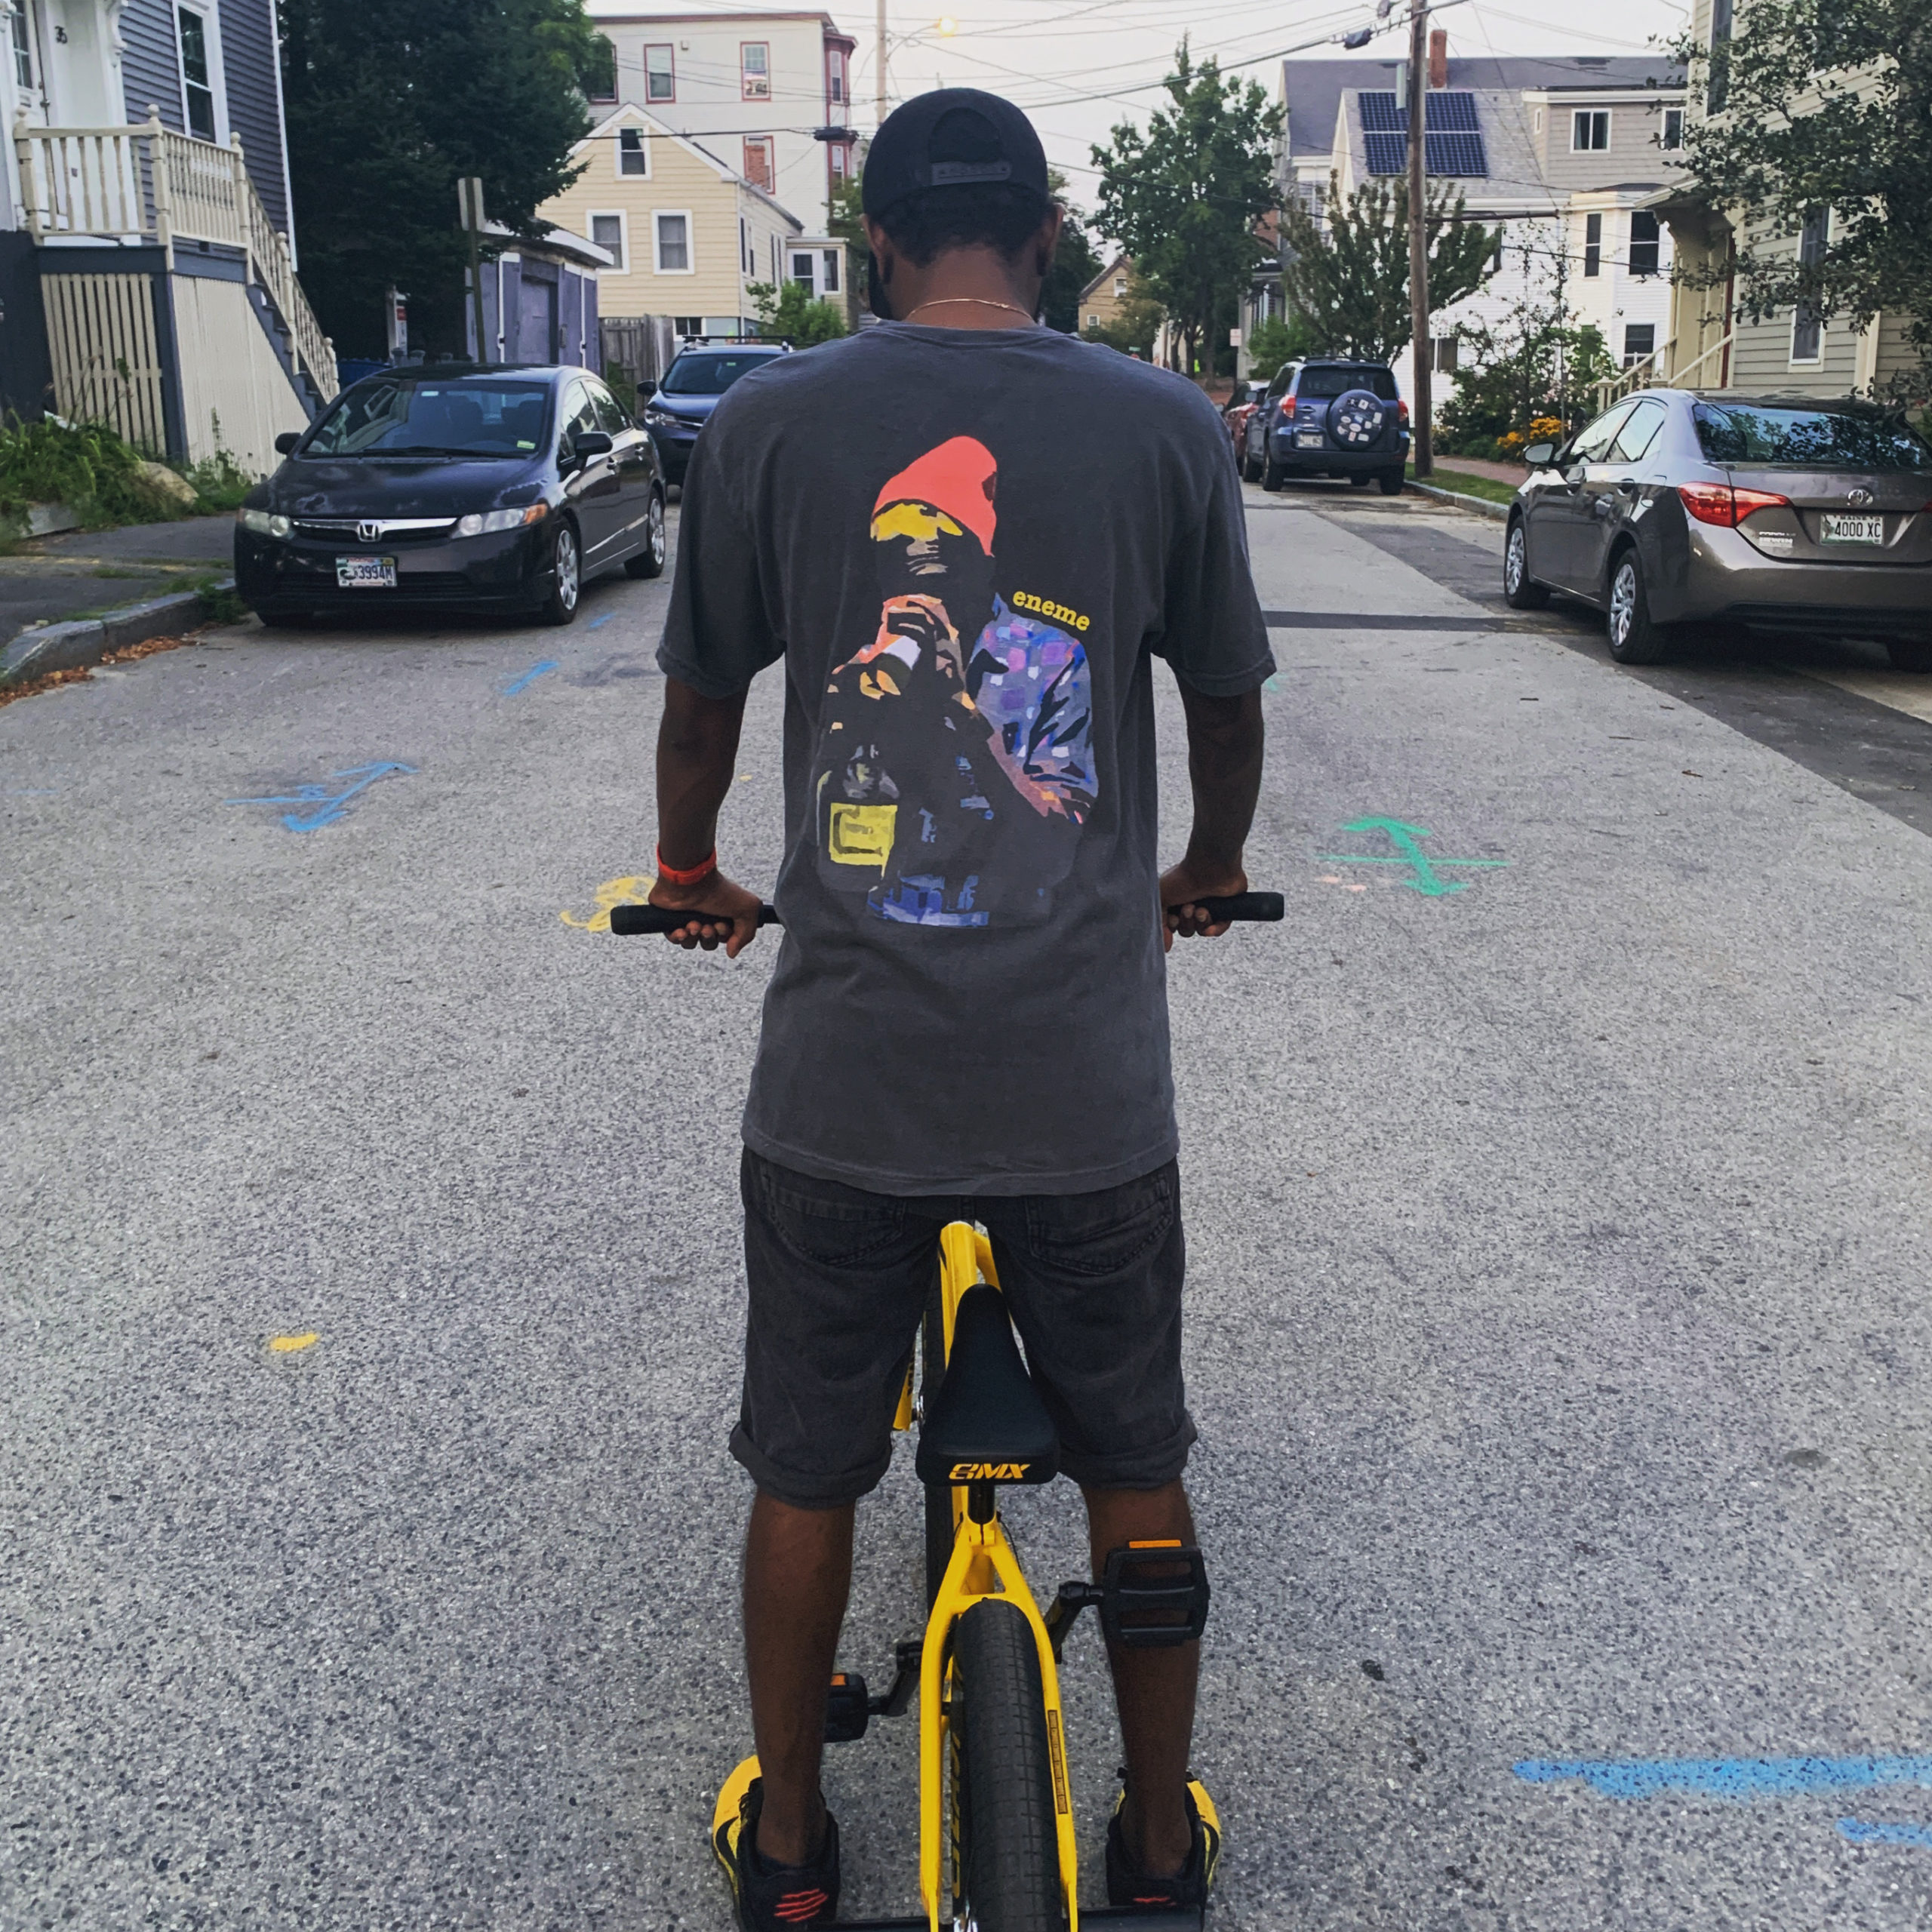 Man on bicycle wearing cloth gotten from eneme clothing co